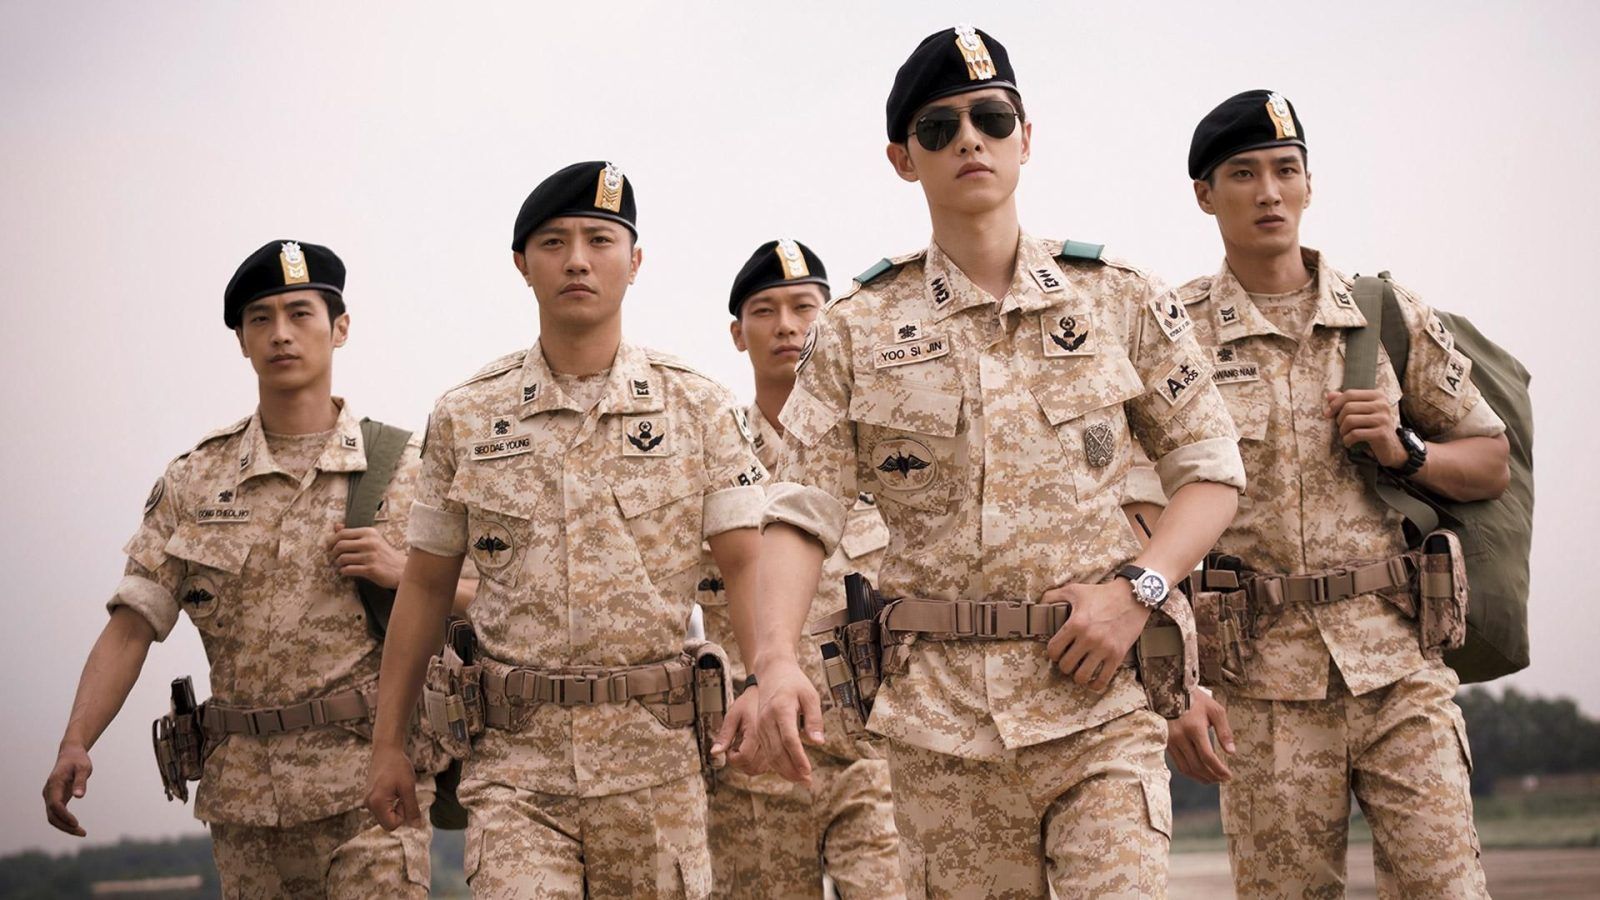 Best military KDramas to tune into for your next Netflix binge